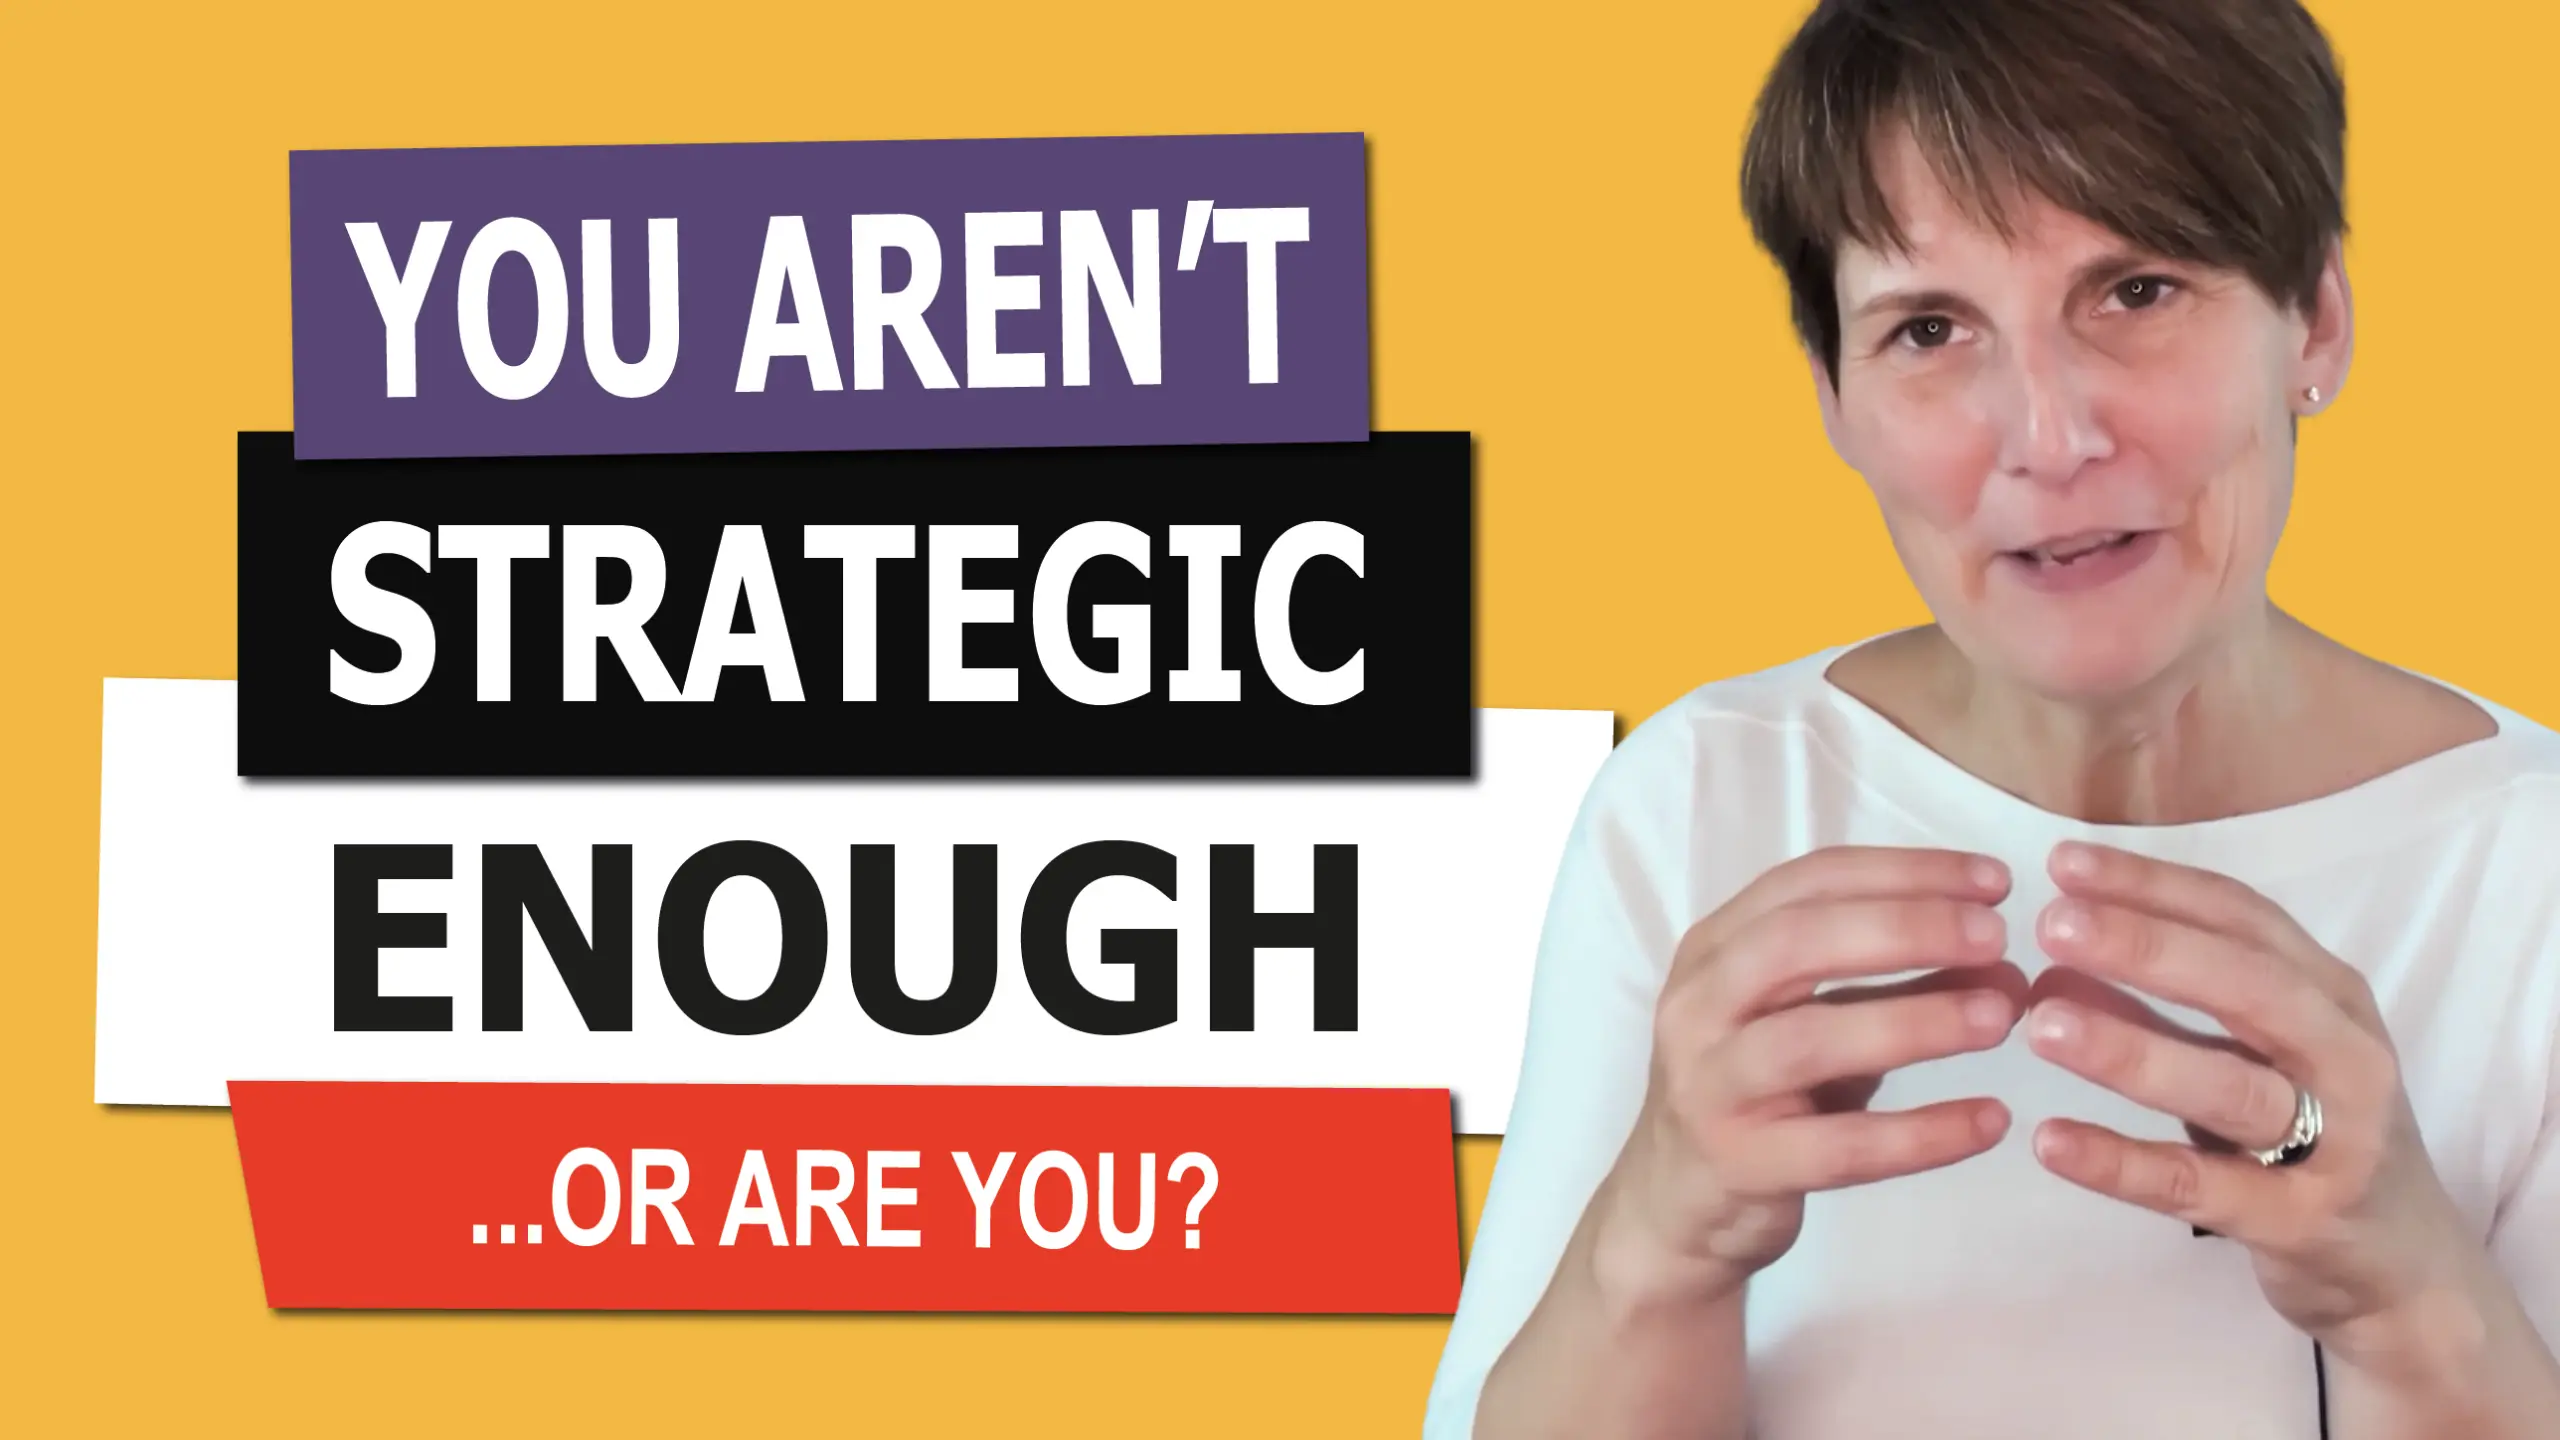 You Aren't Strategic Enough... Or Are You? with Liane Davey